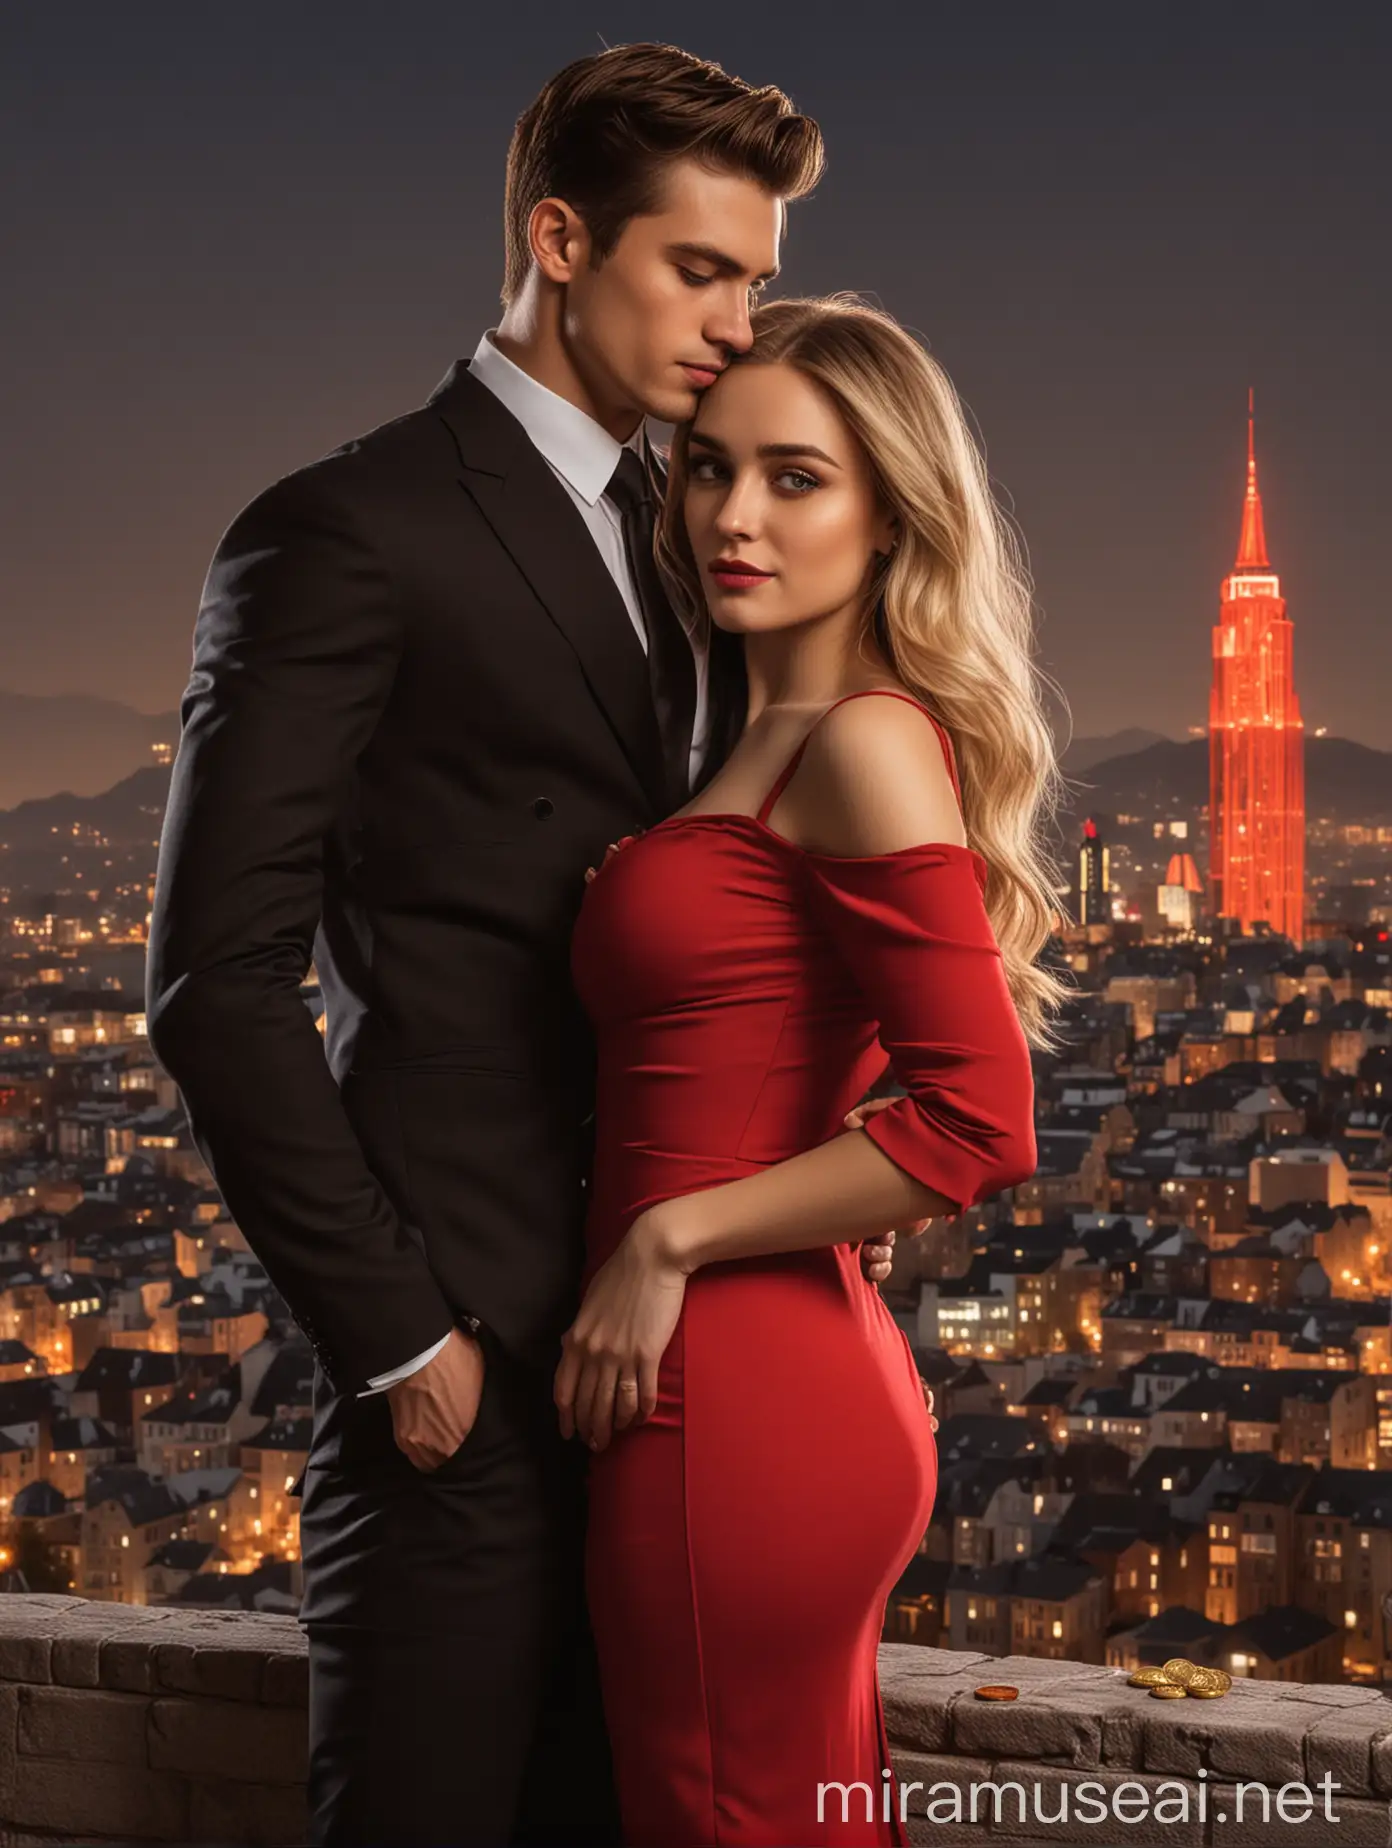 A beautiful woman in a hot fitted black and red dress, leaning against a handsome young man in suit, with a golden luminous city behind them, and a coin glowing below them